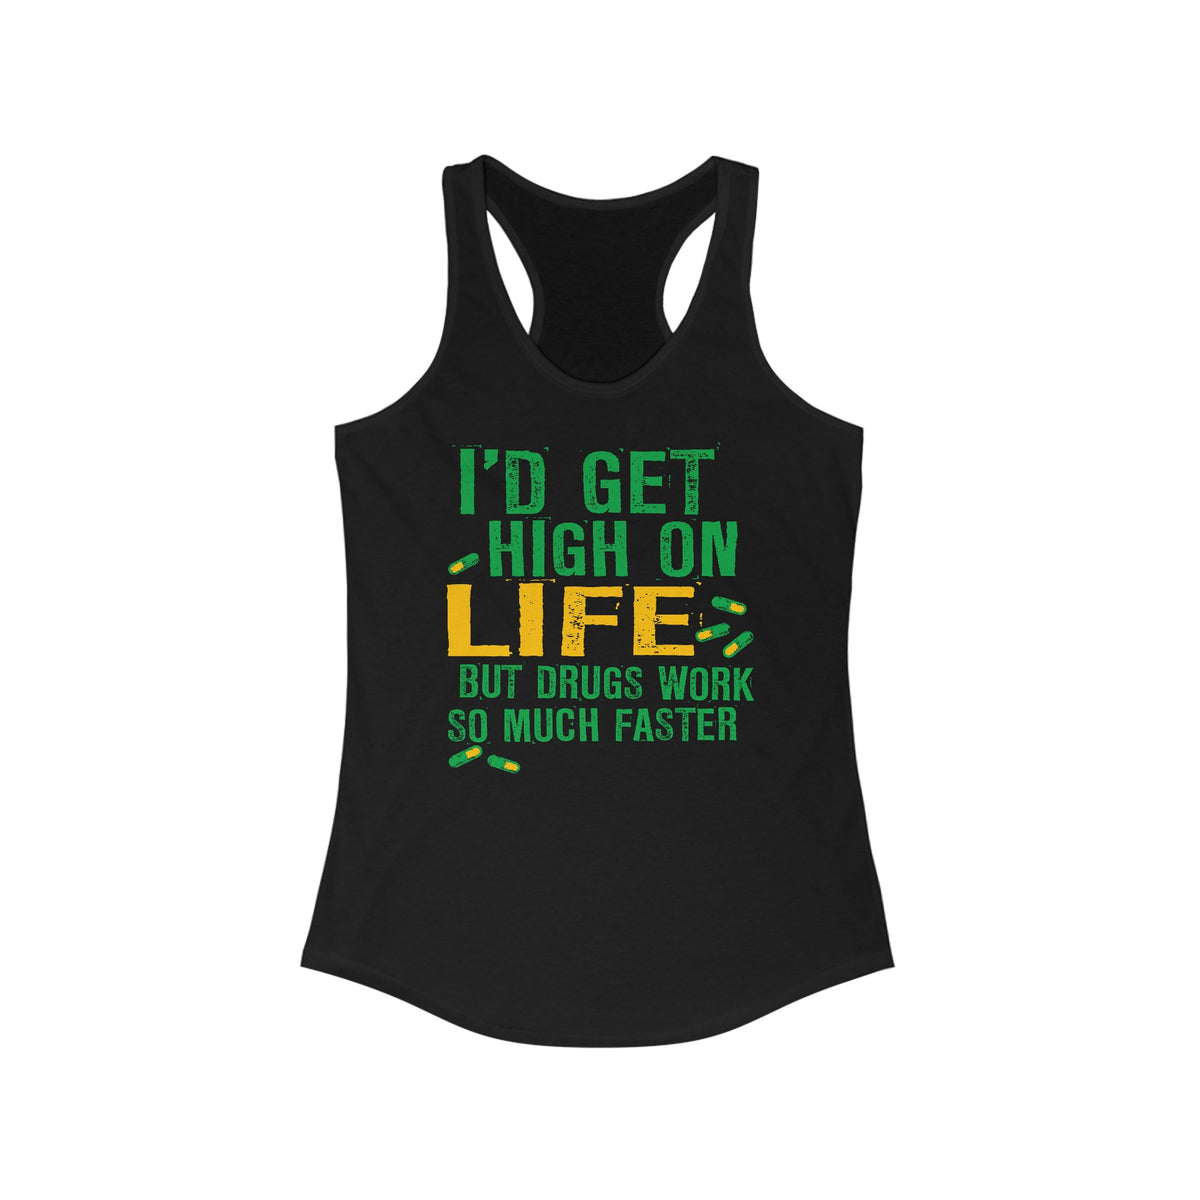 I'D Get High On Life But Drugs Work So Much Faster - Women’s Racerback Tank